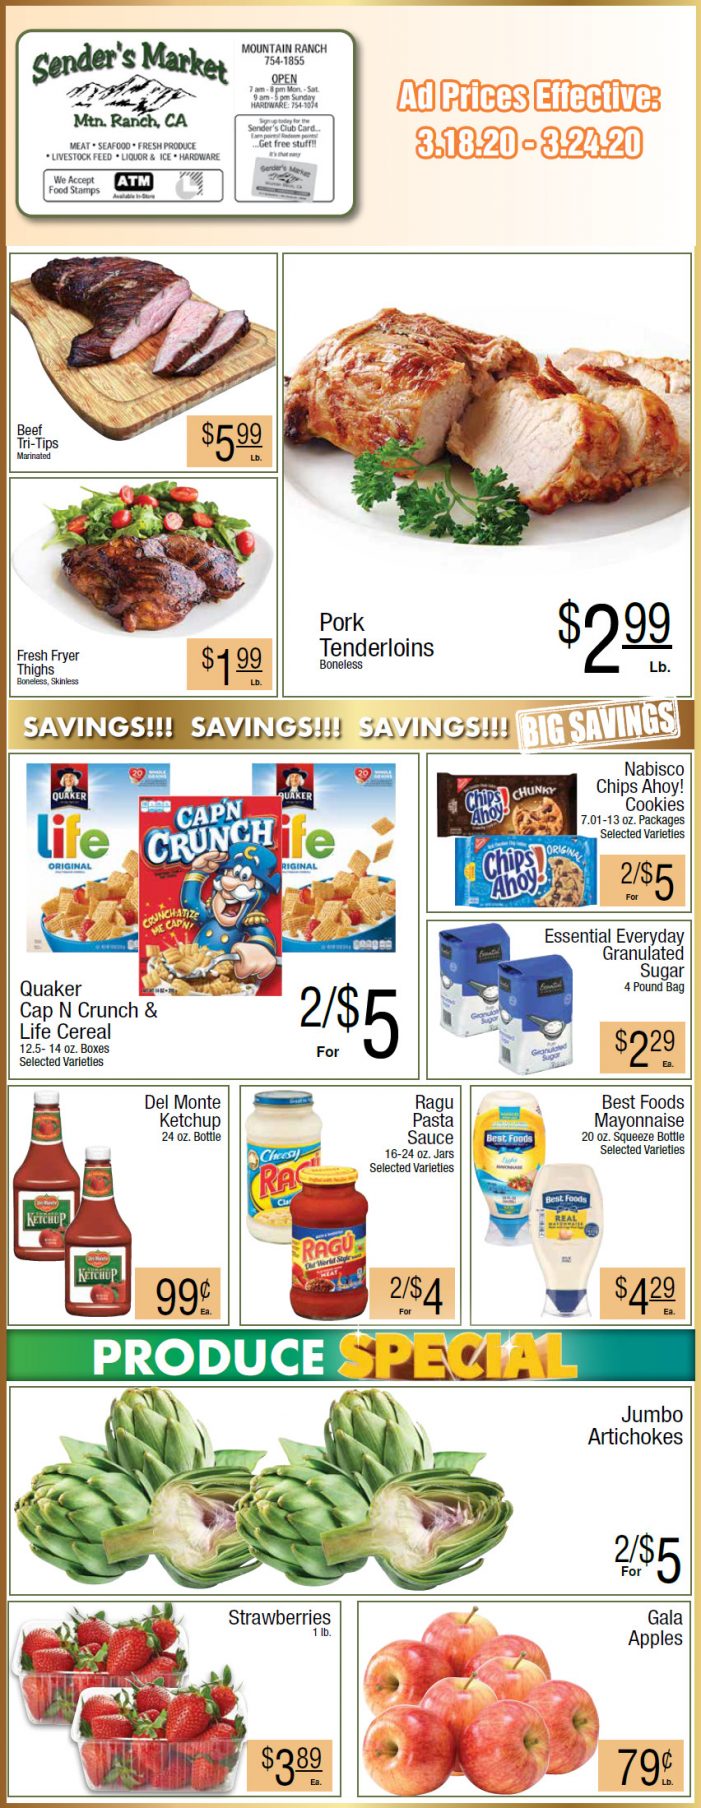 Sender’s Market’s Weekly Ad & Grocery Specials Through March 24th